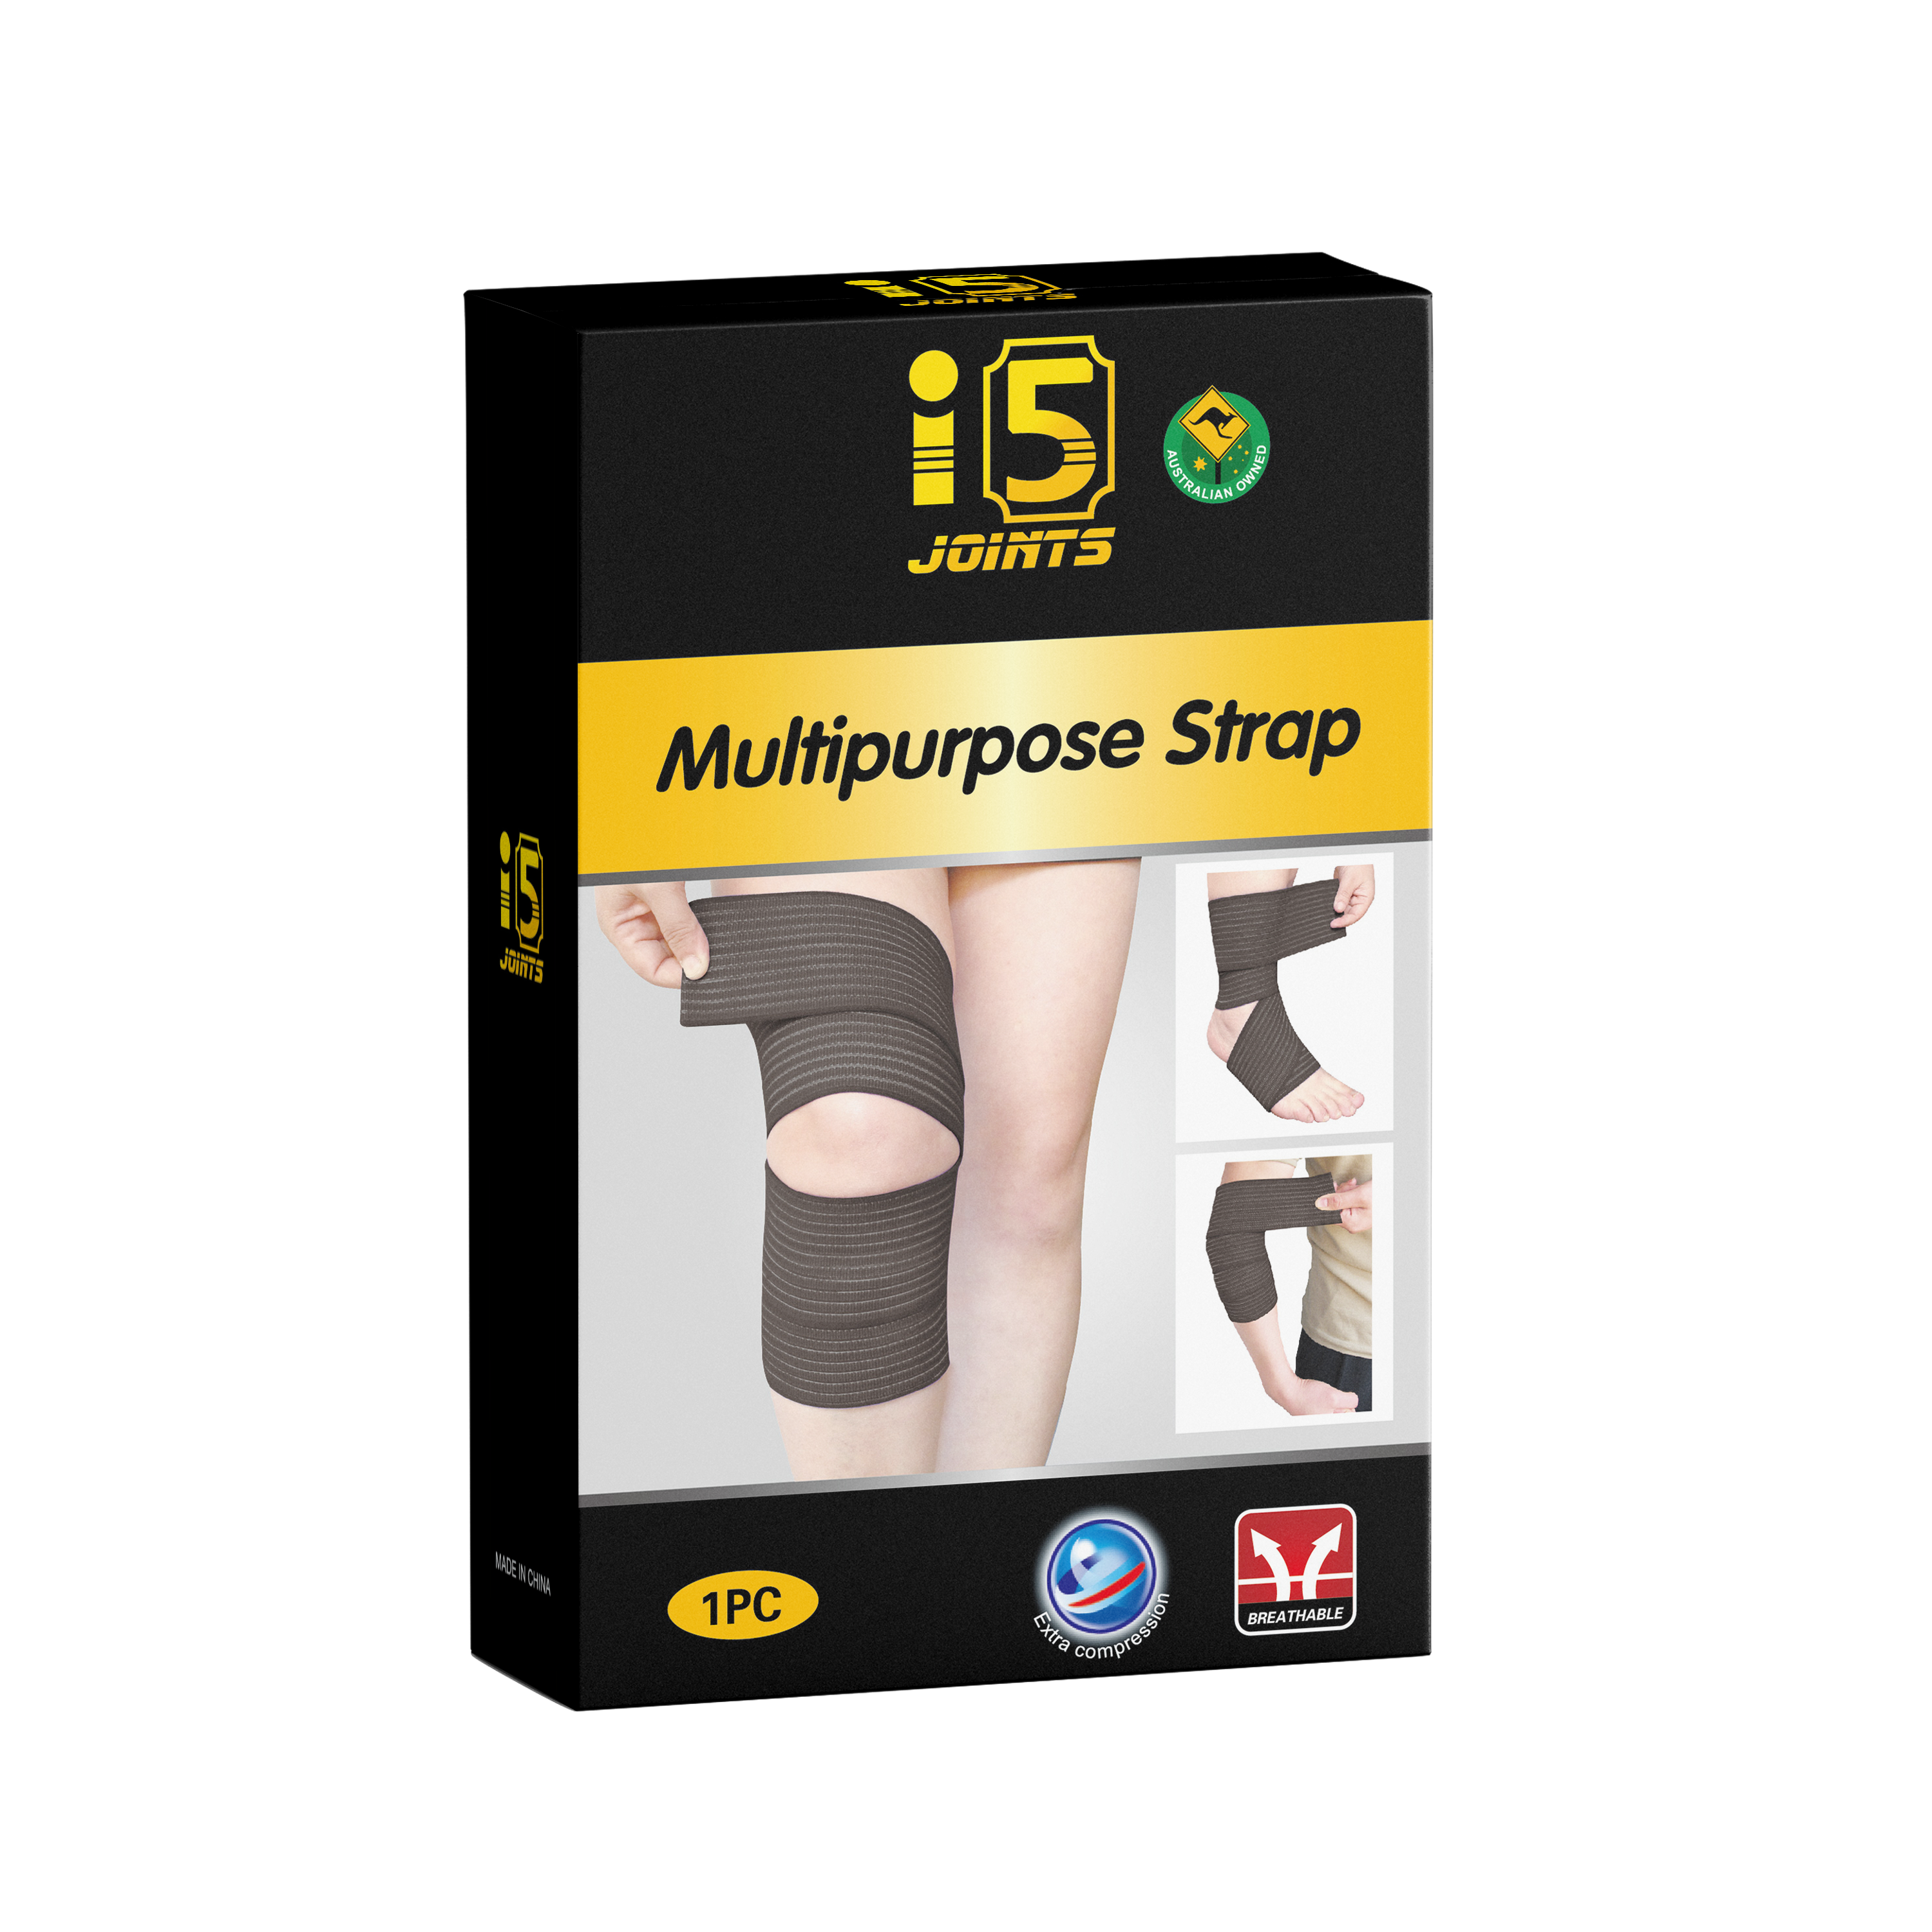 I5Joints-Multipurpose Strap(offers unparalleled adaptability,helps reduce swelling, alleviate pain, and promote healing)